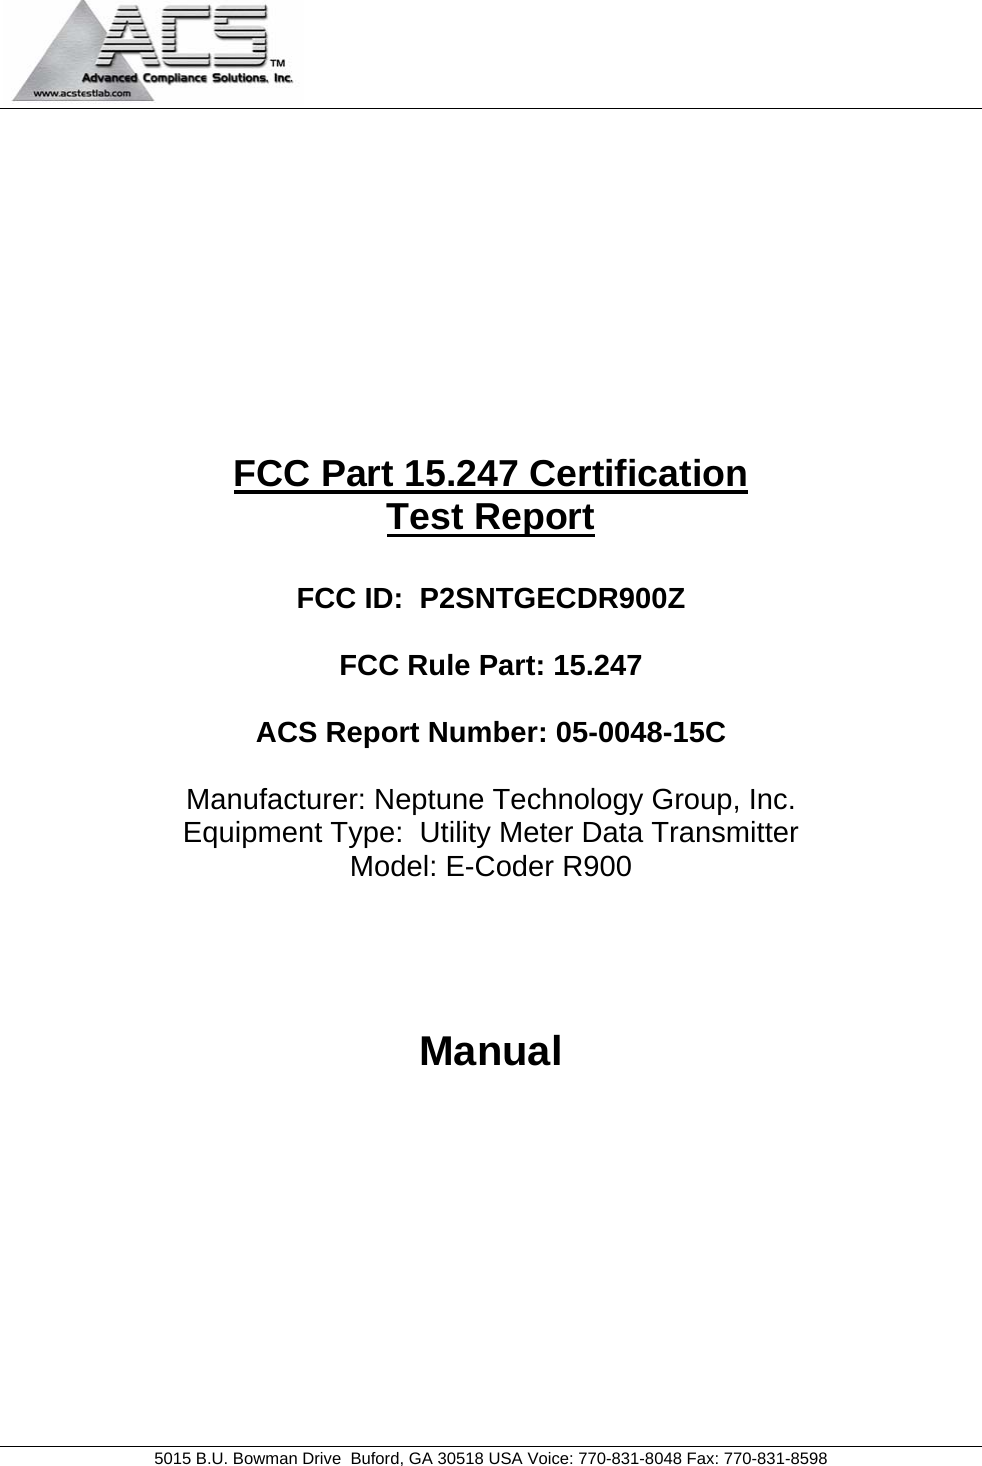  5015 B.U. Bowman Drive  Buford, GA 30518 USA Voice: 770-831-8048 Fax: 770-831-8598   FCC Part 15.247 Certification Test Report  FCC ID:  P2SNTGECDR900Z  FCC Rule Part: 15.247  ACS Report Number: 05-0048-15C   Manufacturer: Neptune Technology Group, Inc. Equipment Type:  Utility Meter Data Transmitter Model: E-Coder R900    Manual 